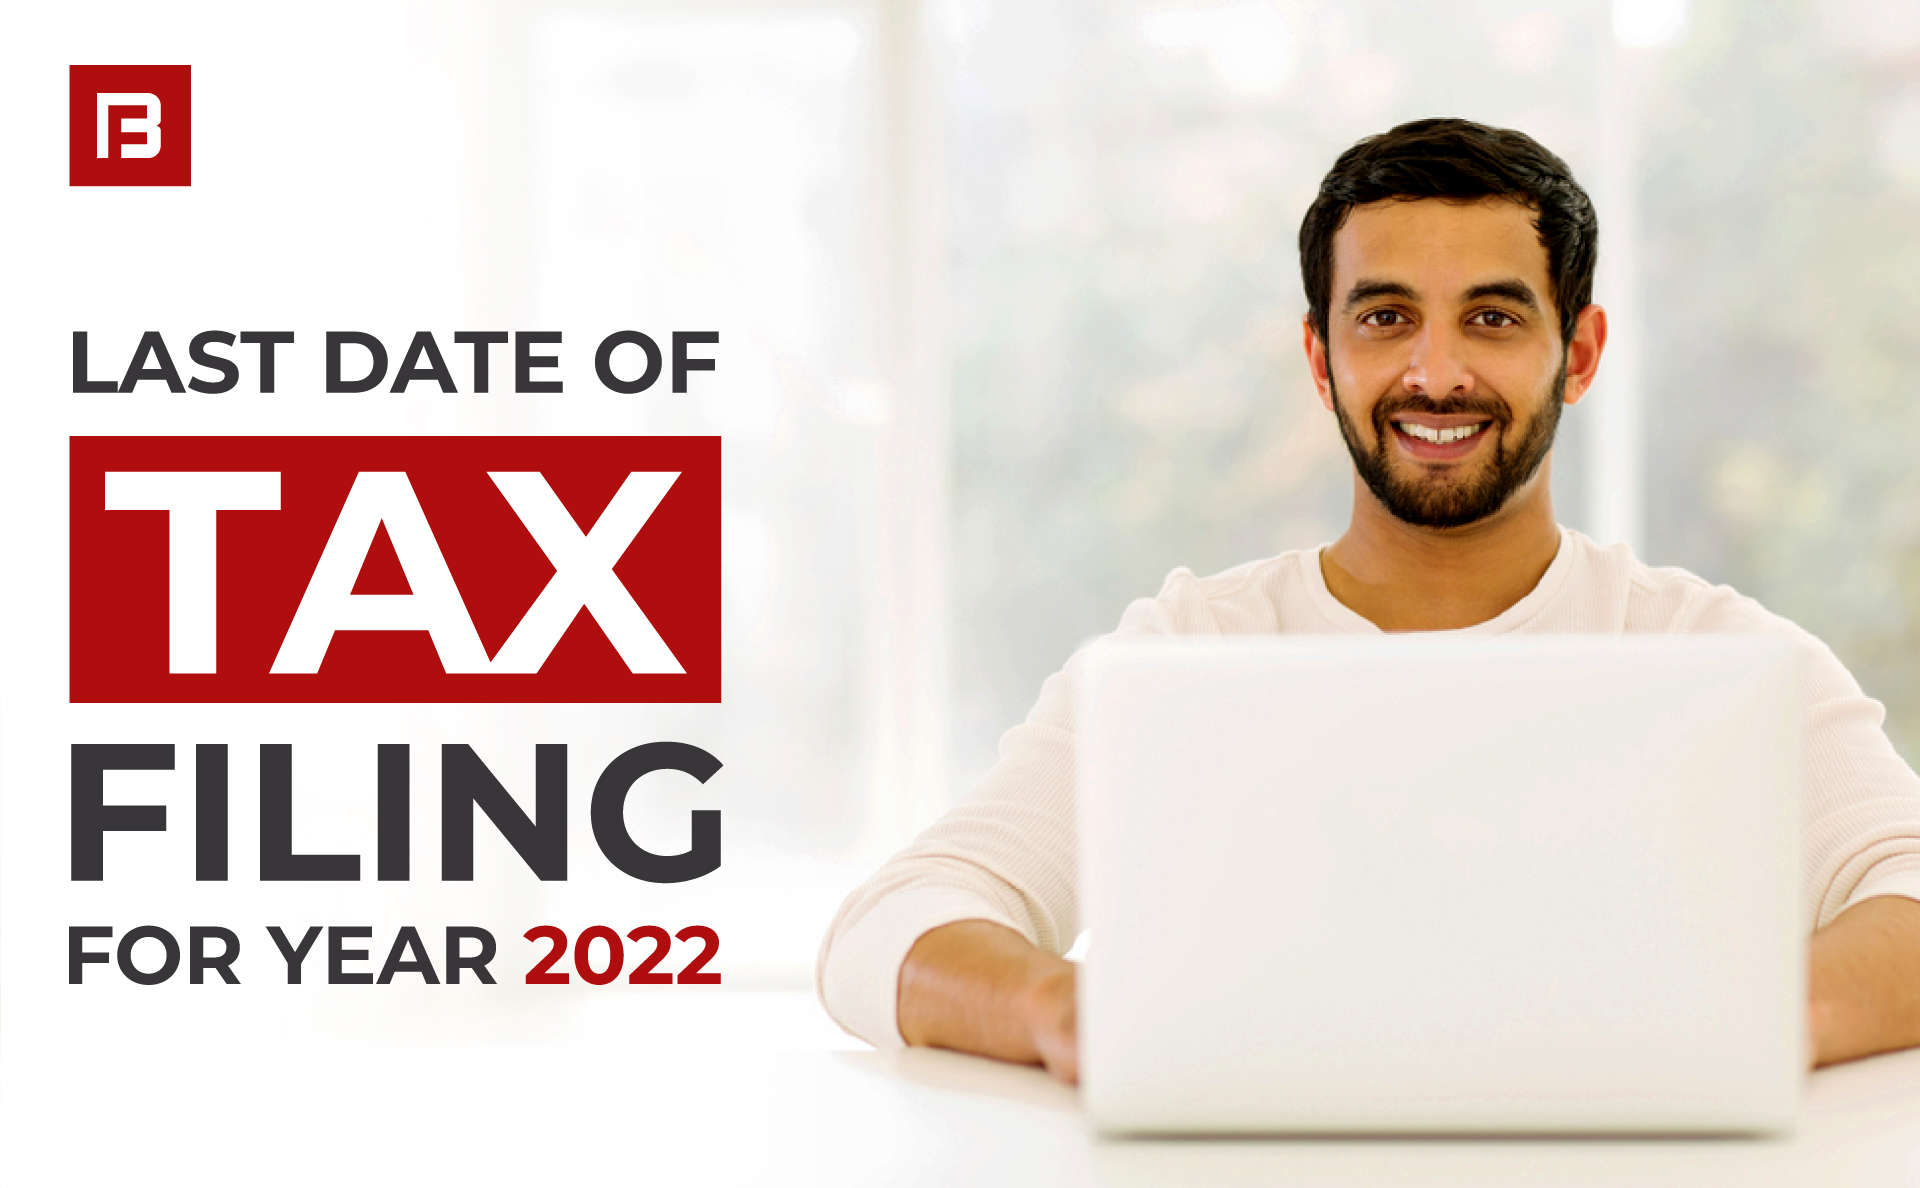 LAST DATE OF TAX FILING FOR YEAR 2022